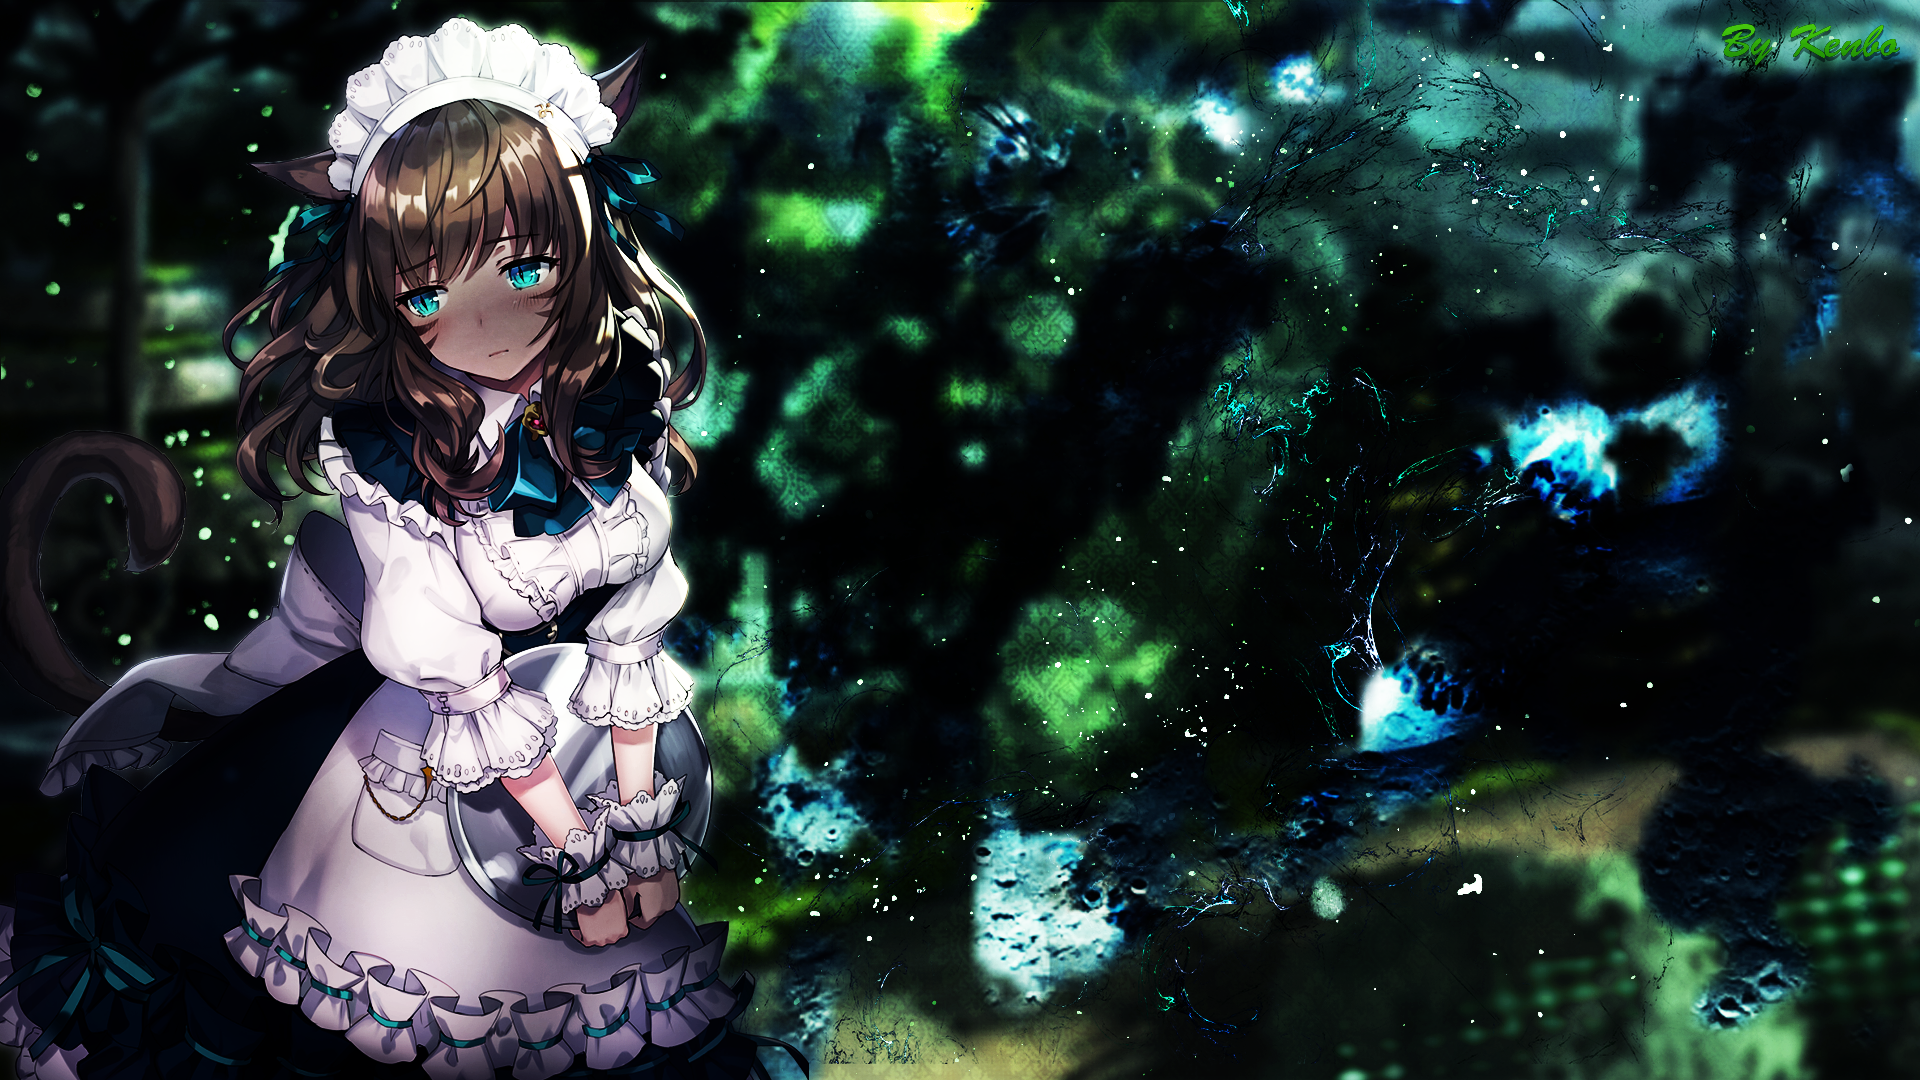 Anime 1920x1080 anime anime girls maid picture-in-picture